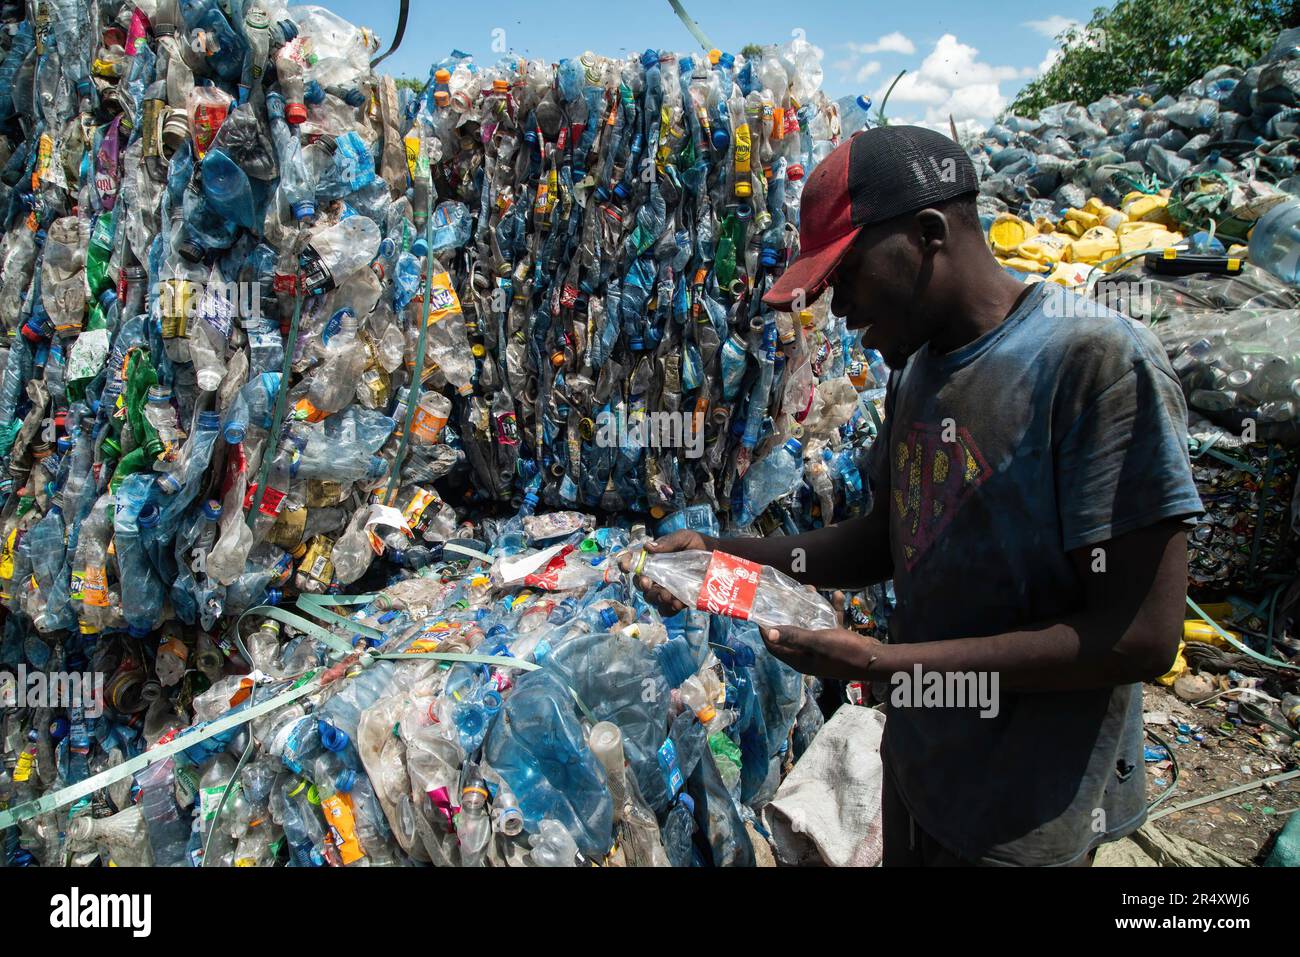 A worker is seen at a recycling plant in Nakuru. Negotiators have gathered in Paris, France for the second round of deliberations to develop a global treaty aimed at tackling the escalating issue of plastic pollution. According to a recent report by the United Nations Environment Programme (UNEP), countries have the potential to reduce plastic pollution by 80% by 2040 by eliminating unnecessary plastics, implementing recycling and reuse strategies, introducing deposit return schemes, and substituting plastic with sustainable alternative materials. Stock Photo